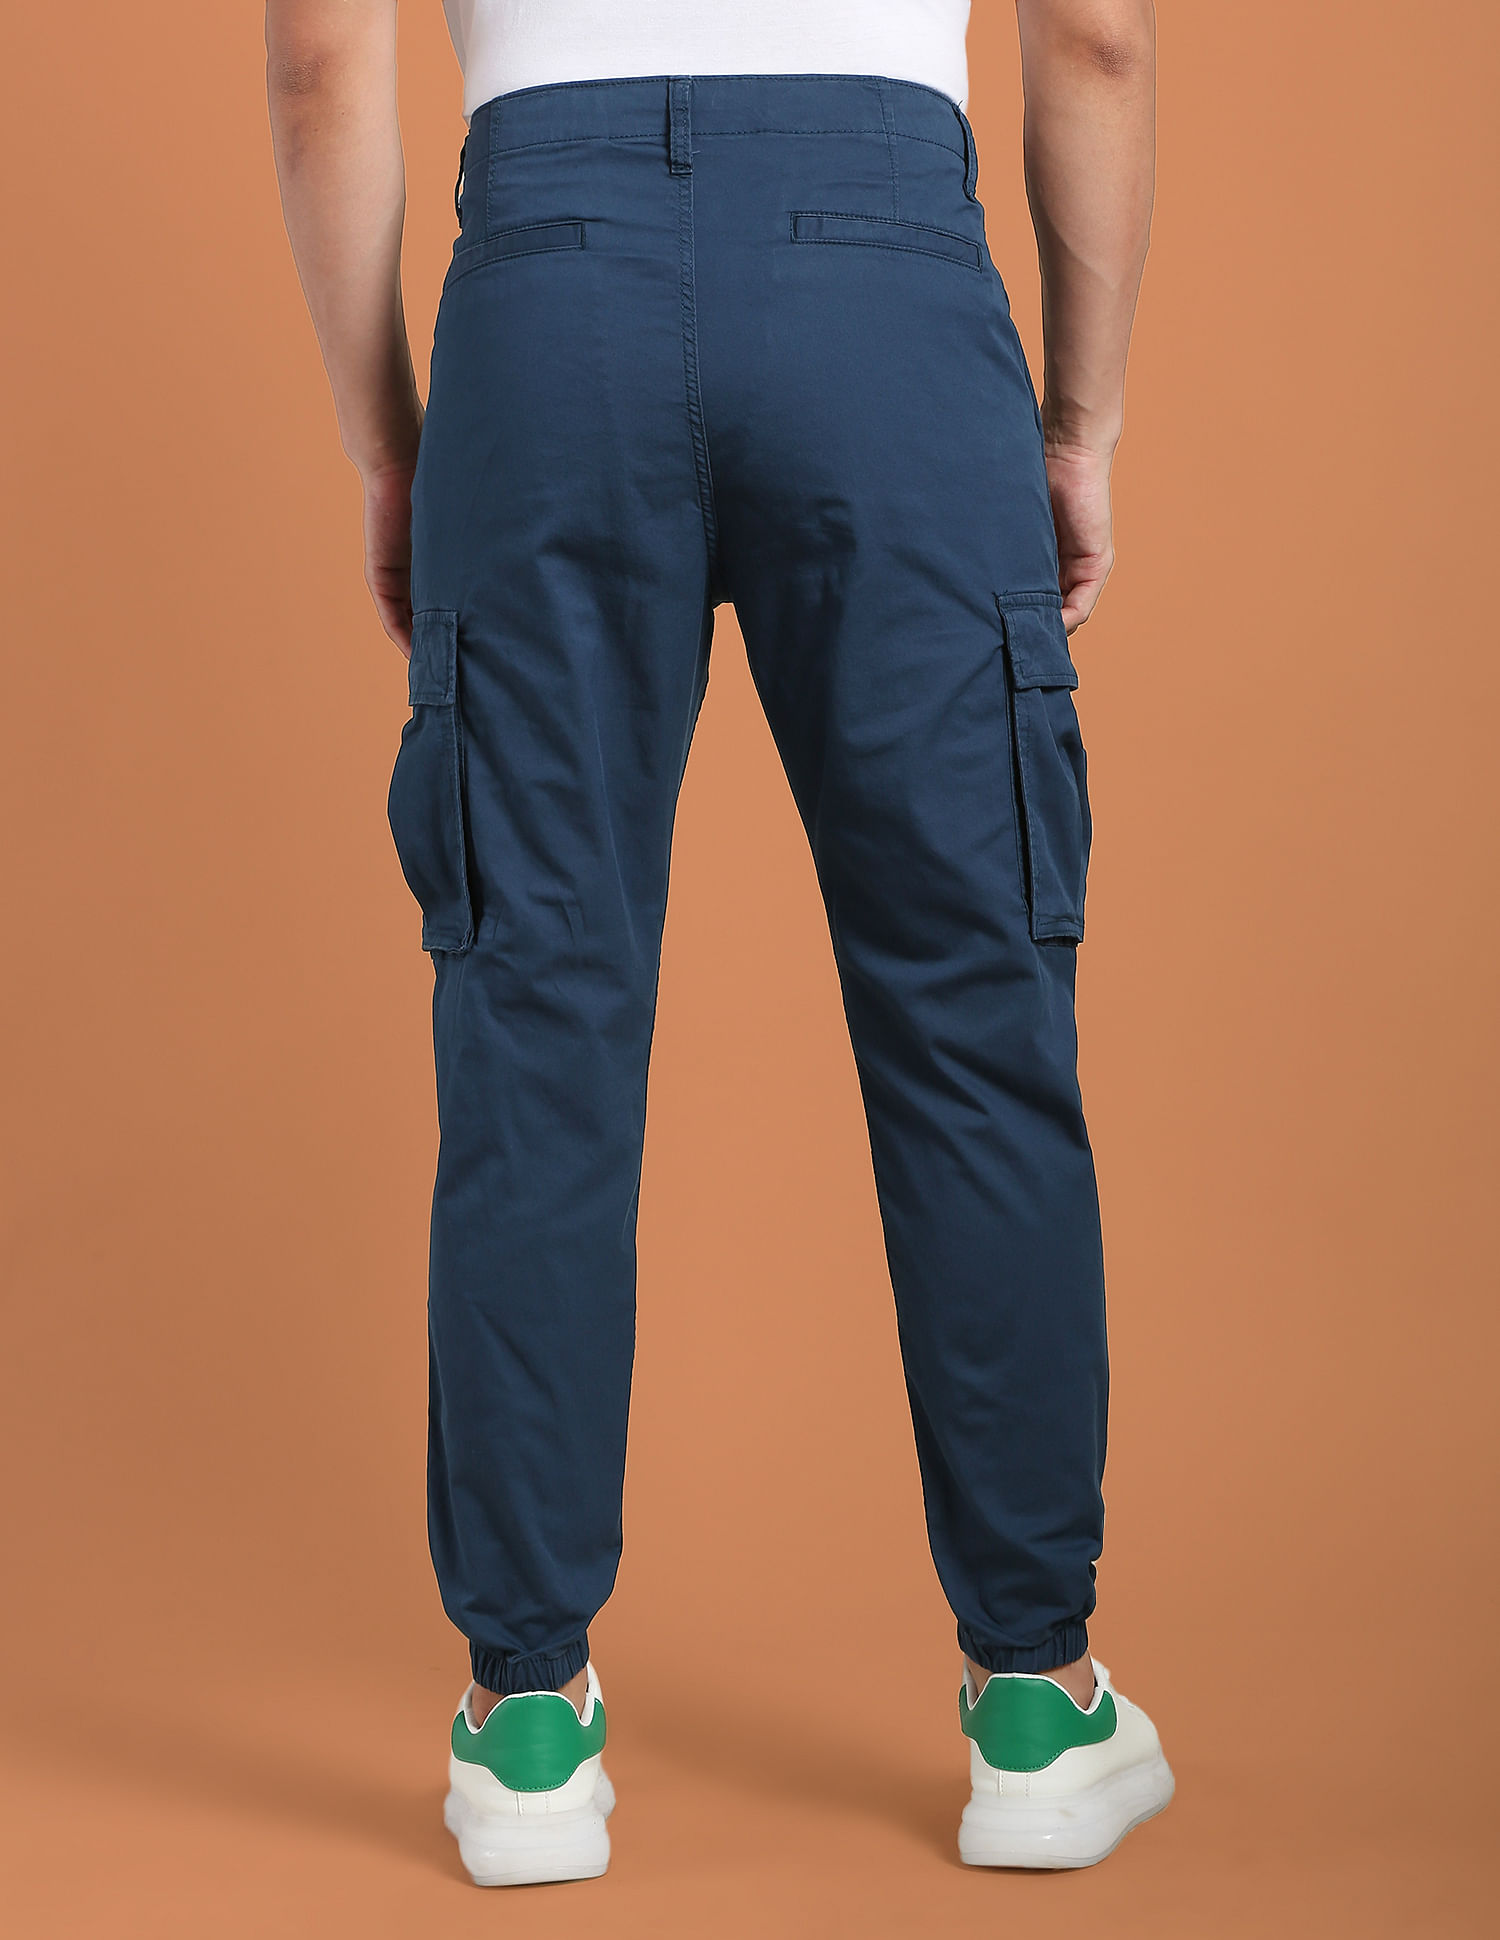 Mens Navy Blue Combat Trousers  Free Delivery  Military Kit